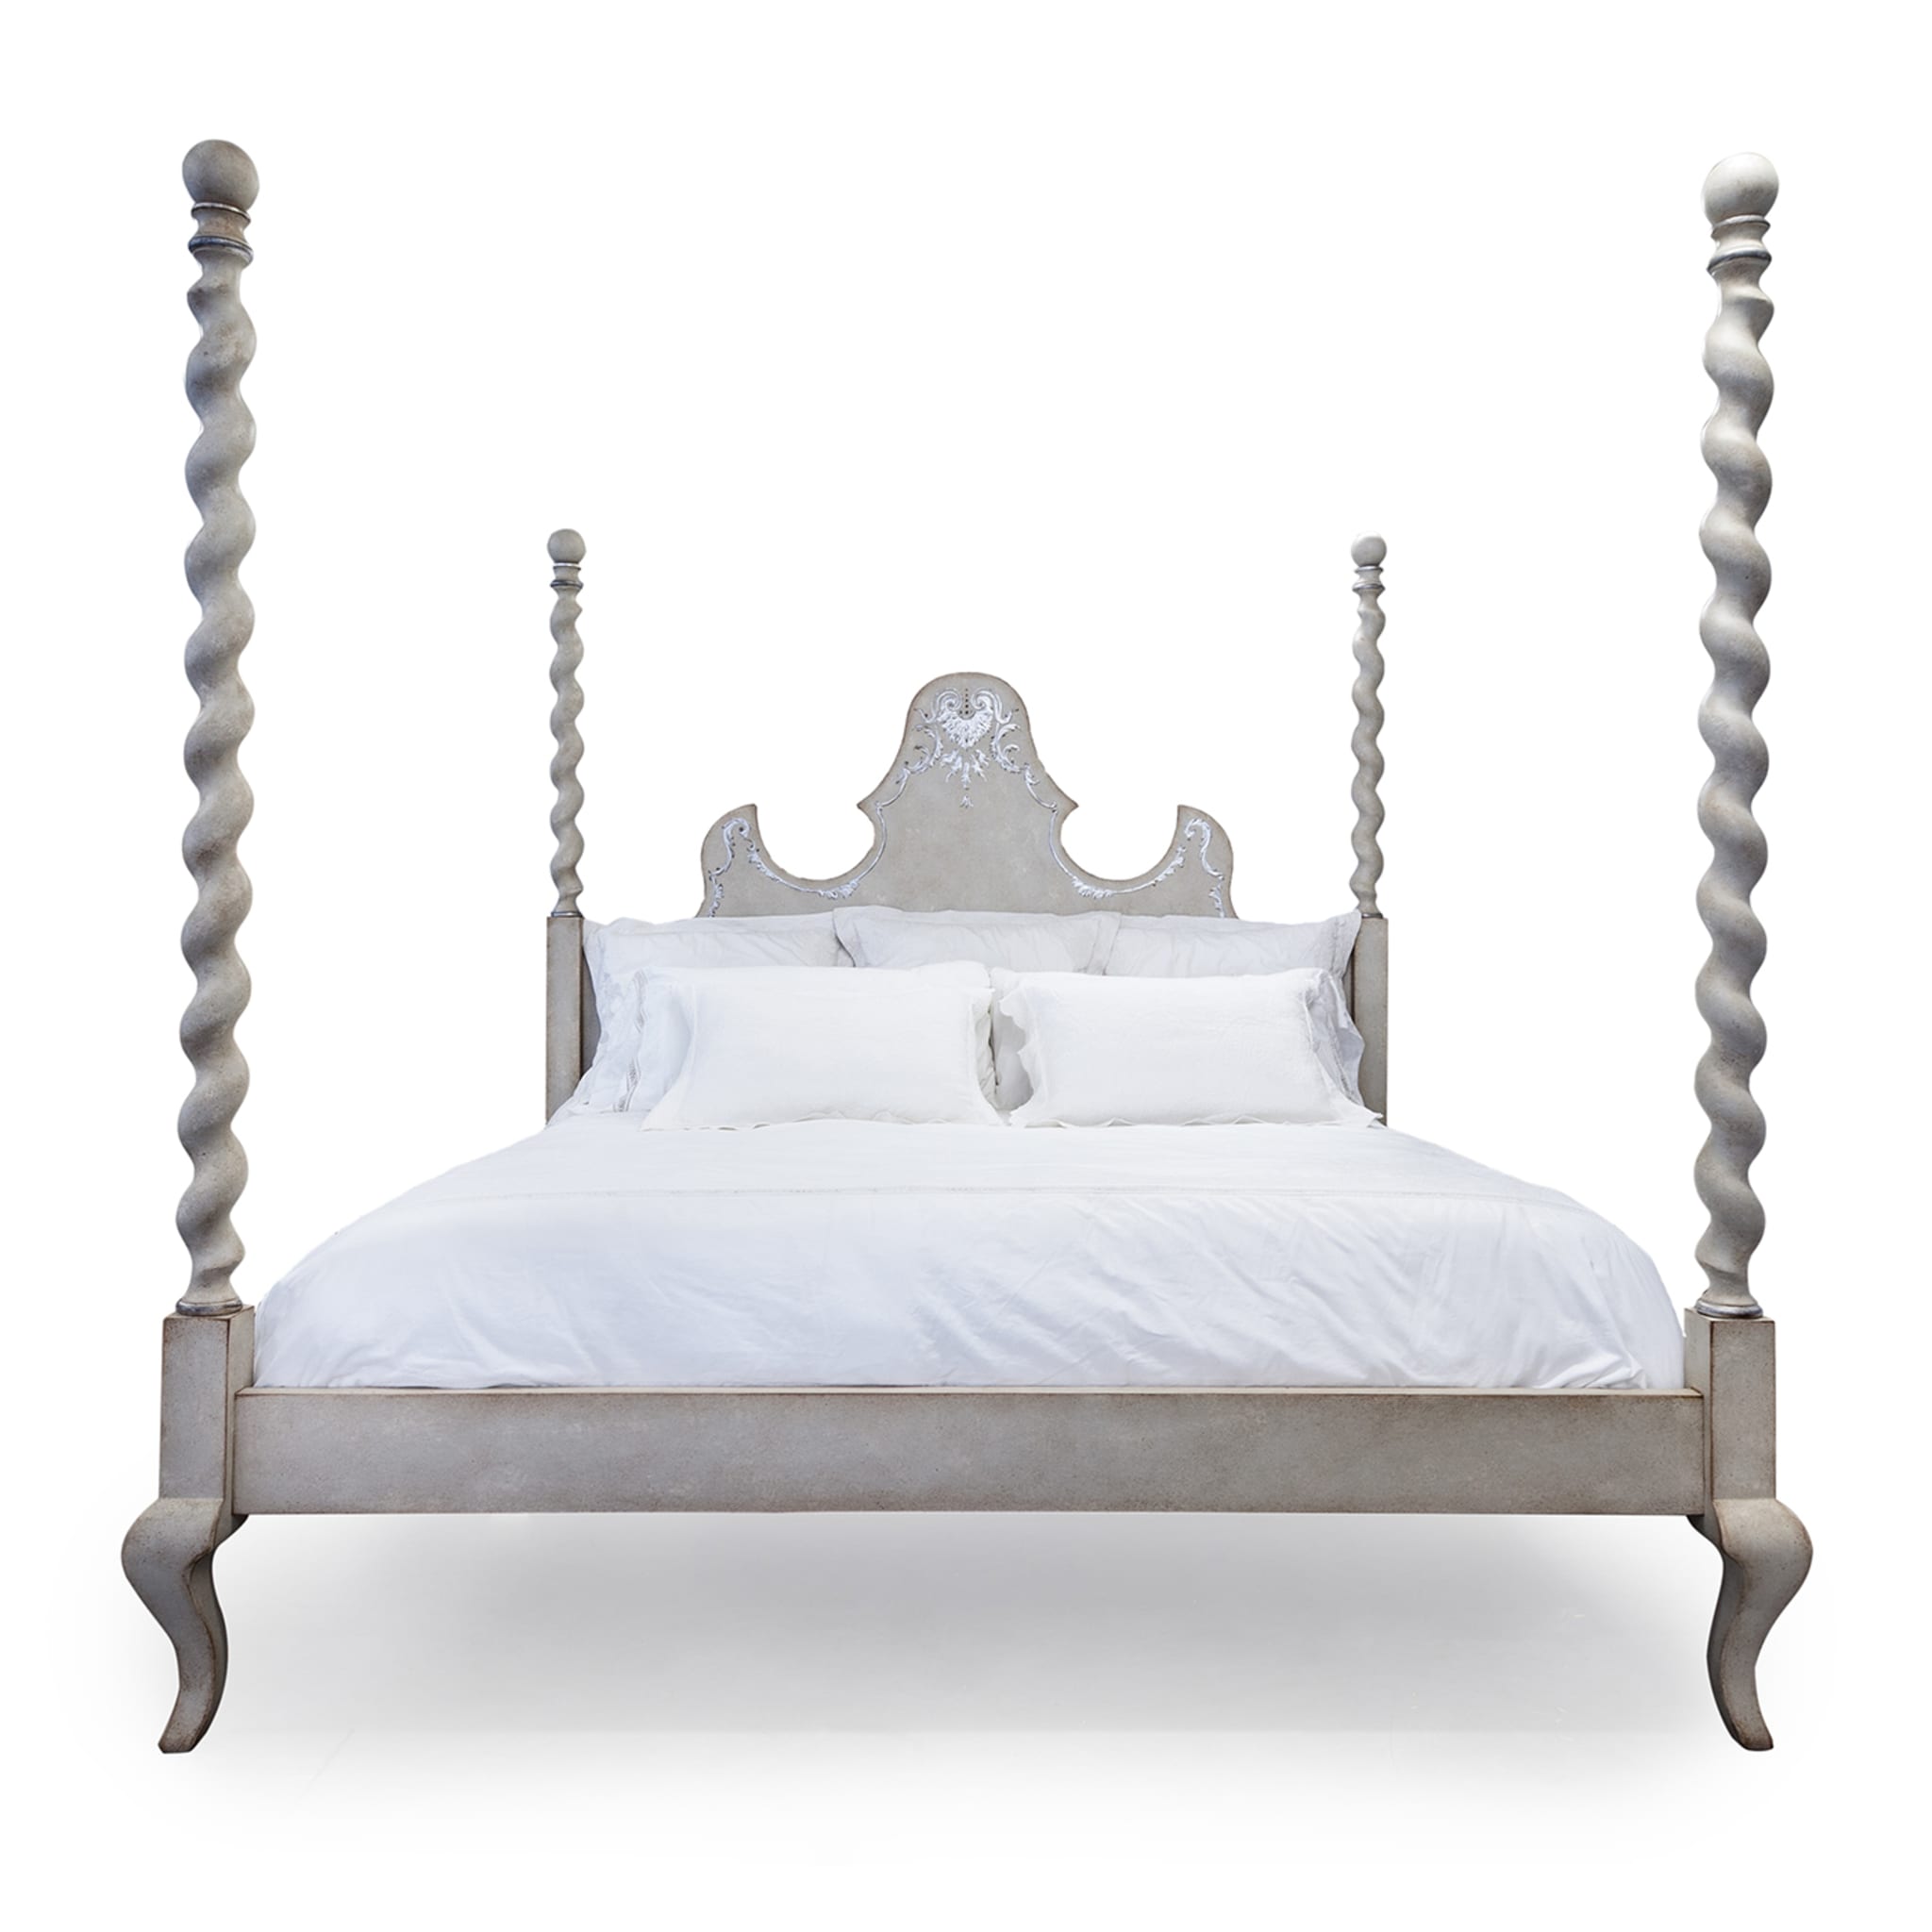 Giotto Silver Textural Decorations King Size Bed - Alternative view 2